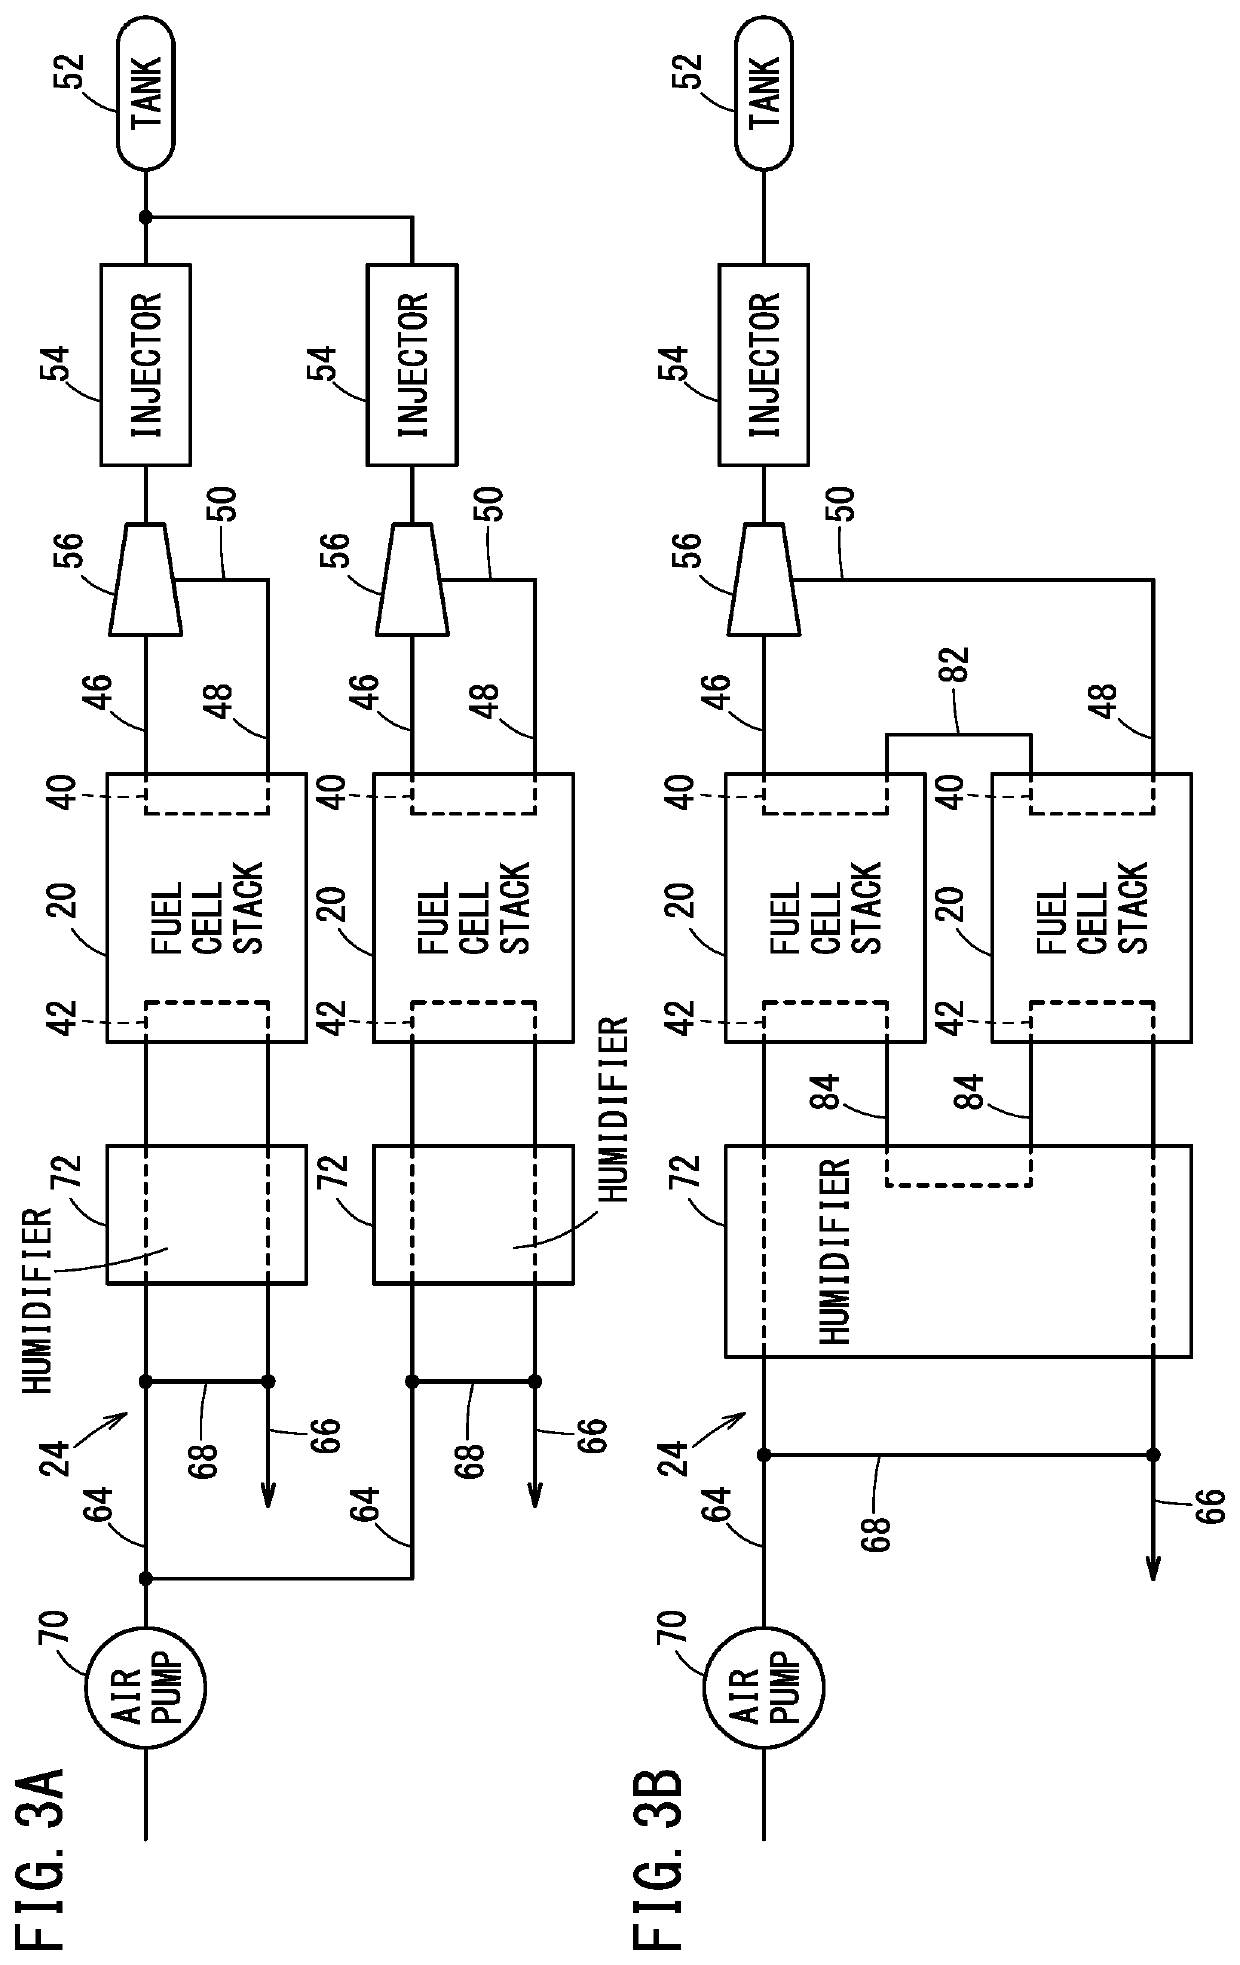 Electrical power control system